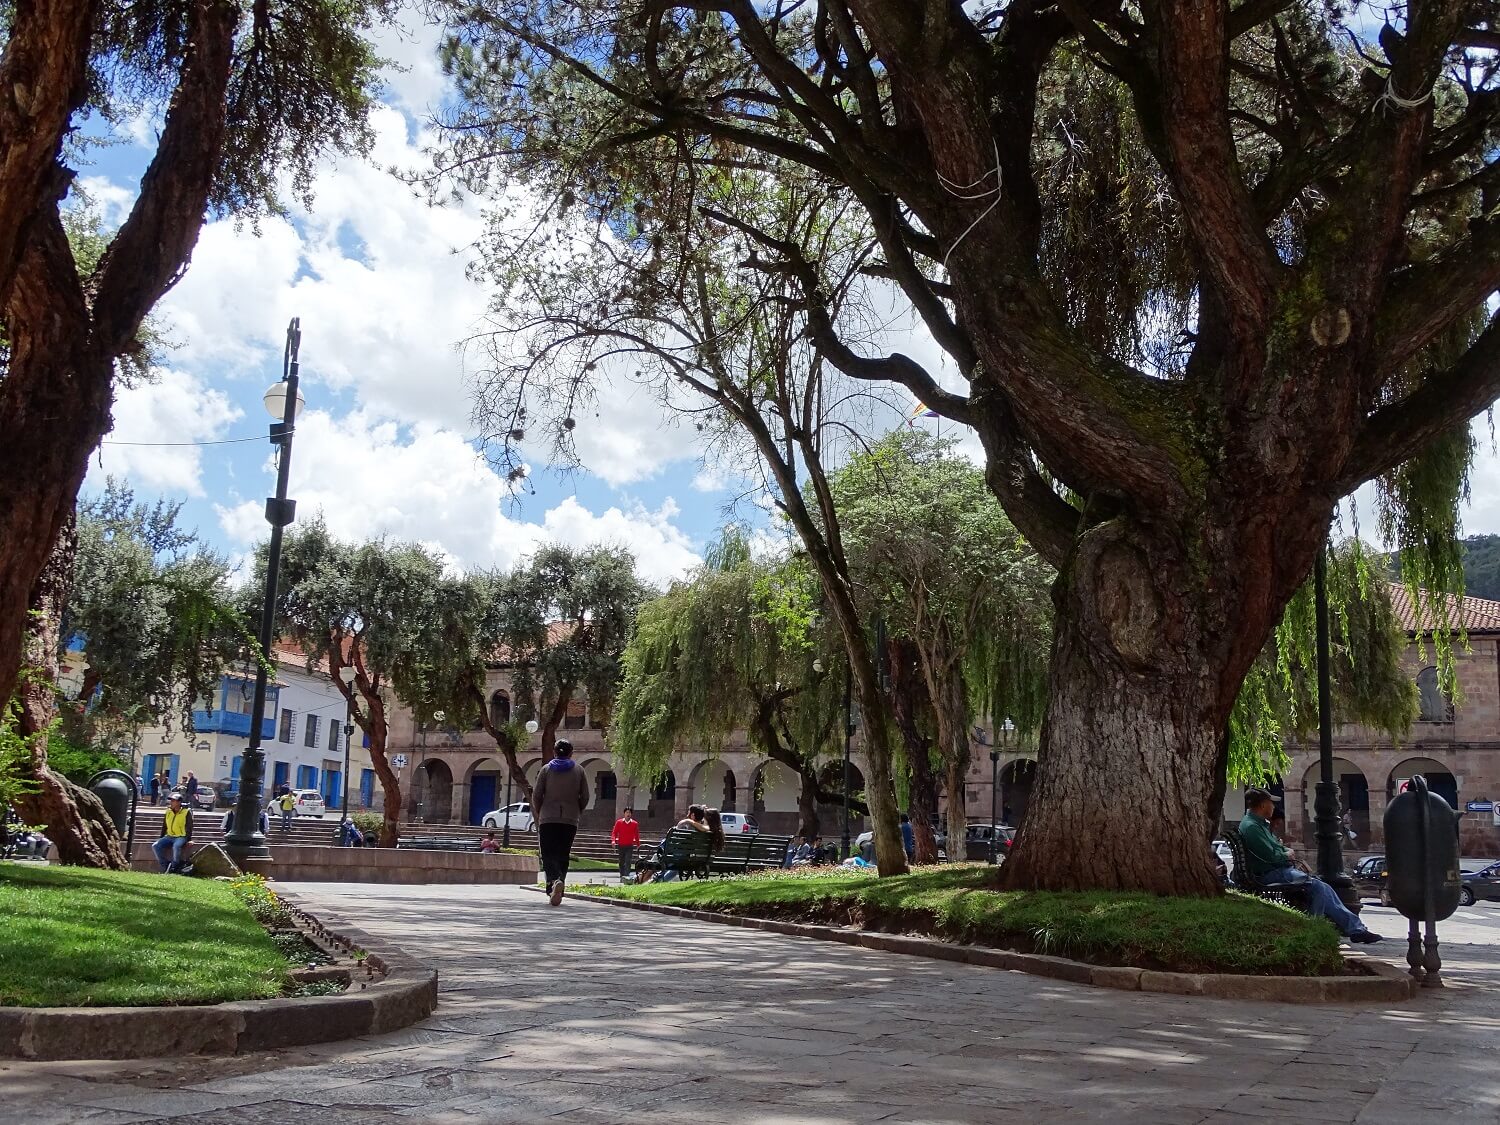 11Plaza Regocijo or Plaza Kusipata is a tranquil, green space next to the main square of Cusco. Visit Cusco alternatively with RESPONSible Travel Peru!